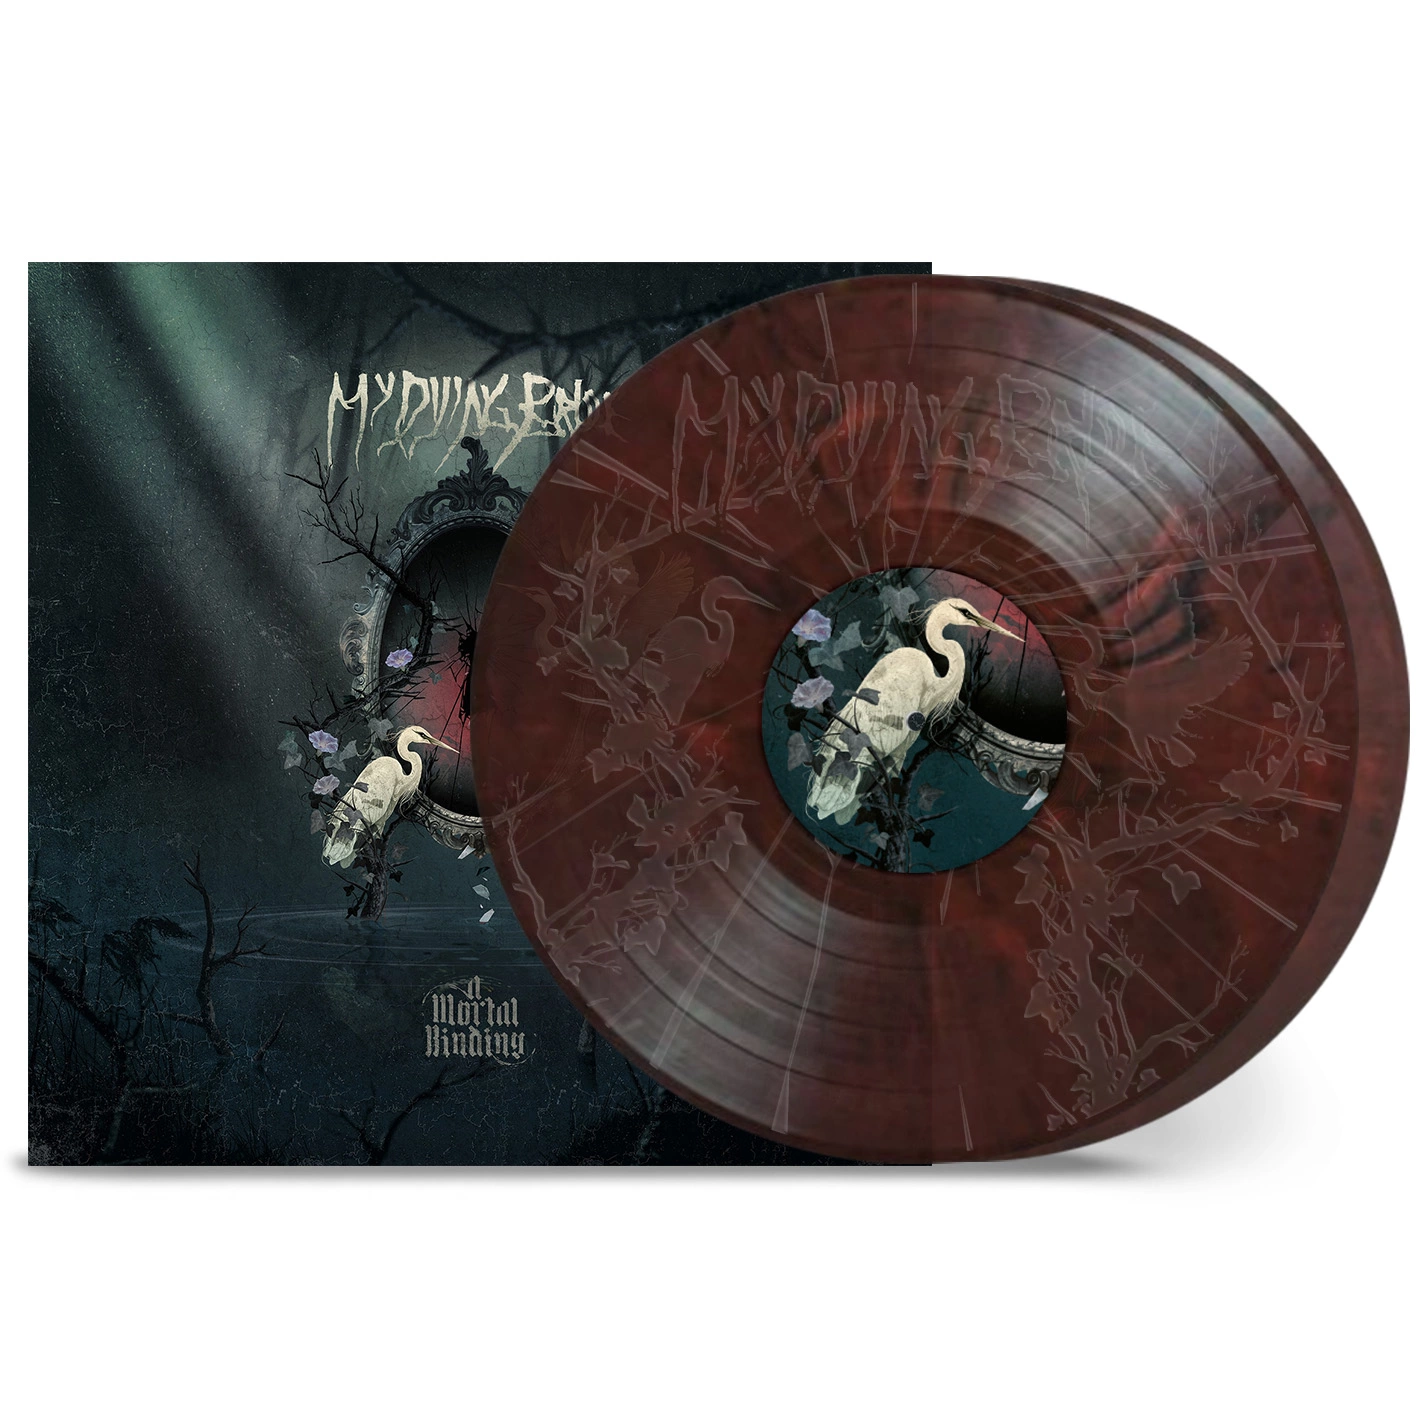 MY DYING BRIDE - A Mortal Binding [TRANSPARENT RED/BLACK SMOKE MARBLED DLP]